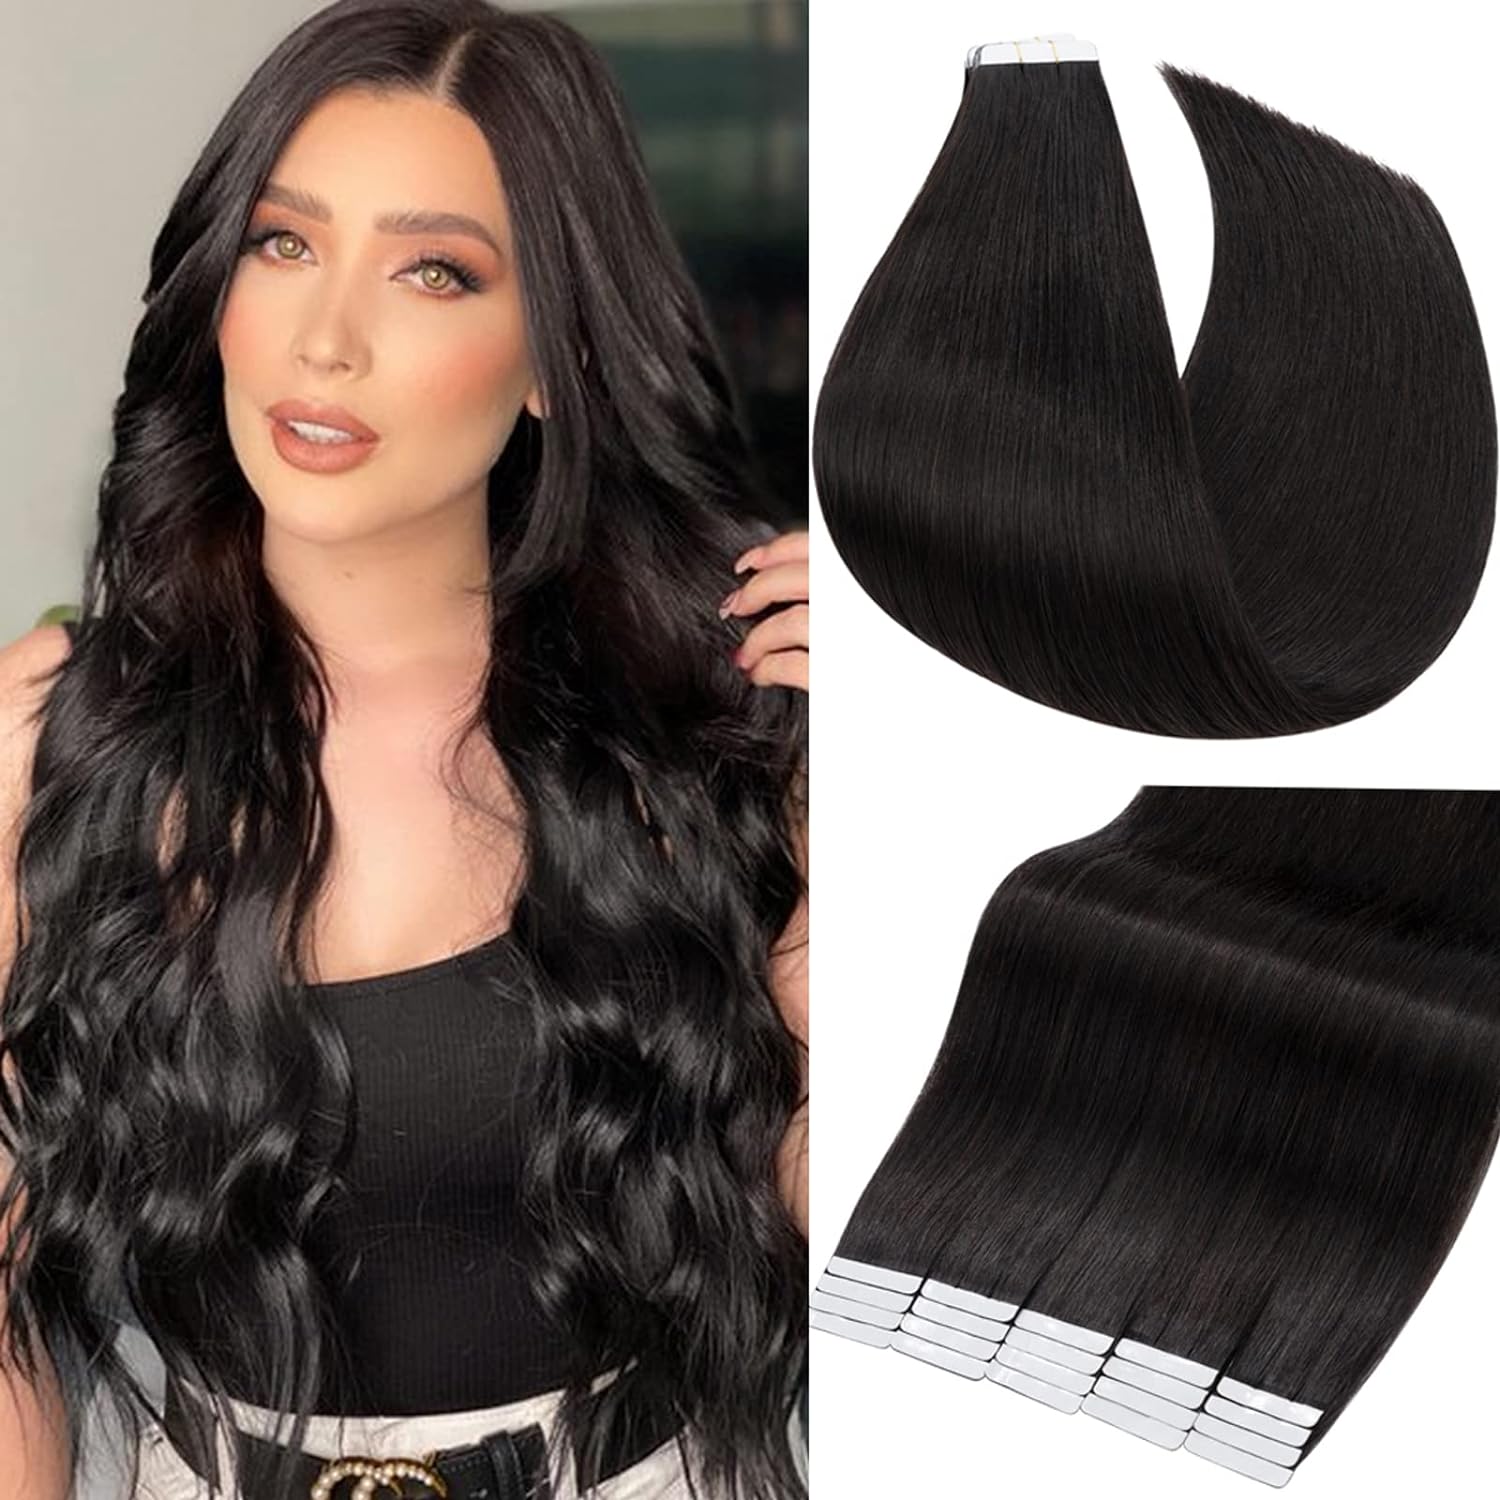 Tape in Hair Extensions Human Hair Natural Black Hair Extensions Tape in Invisible Tape in Extensions Real Human Hair Tape in Seamless Human Hair Extensions 18 Inch #1 40pcs 100g